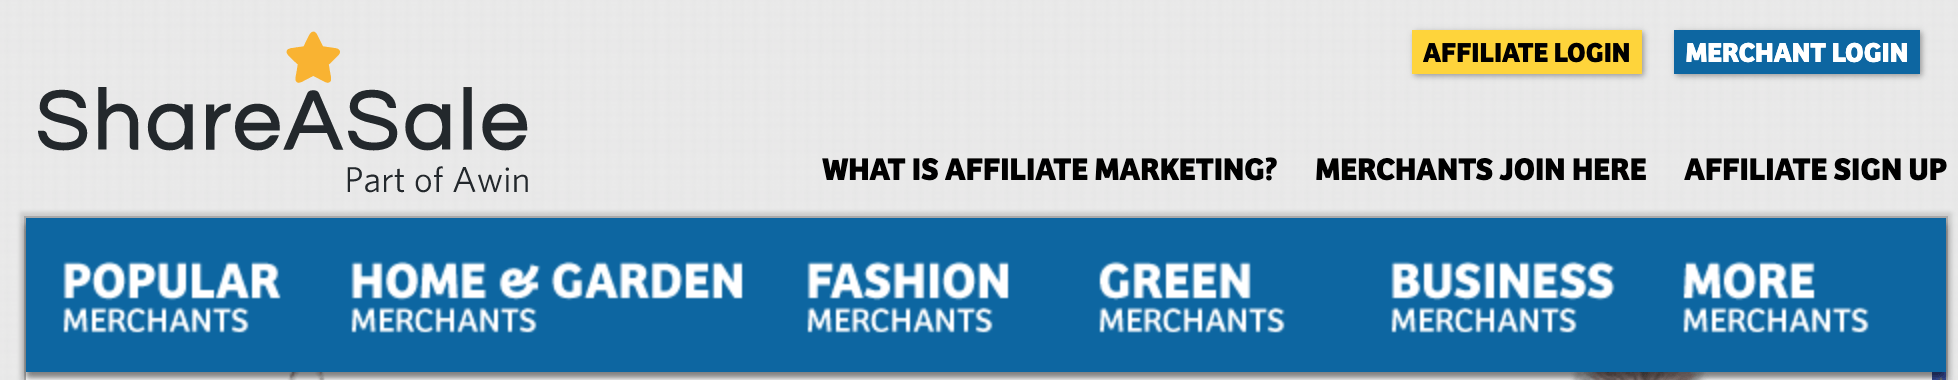 How to Build an Affiliate Marketing Program (That Everyone Wants to Join!)